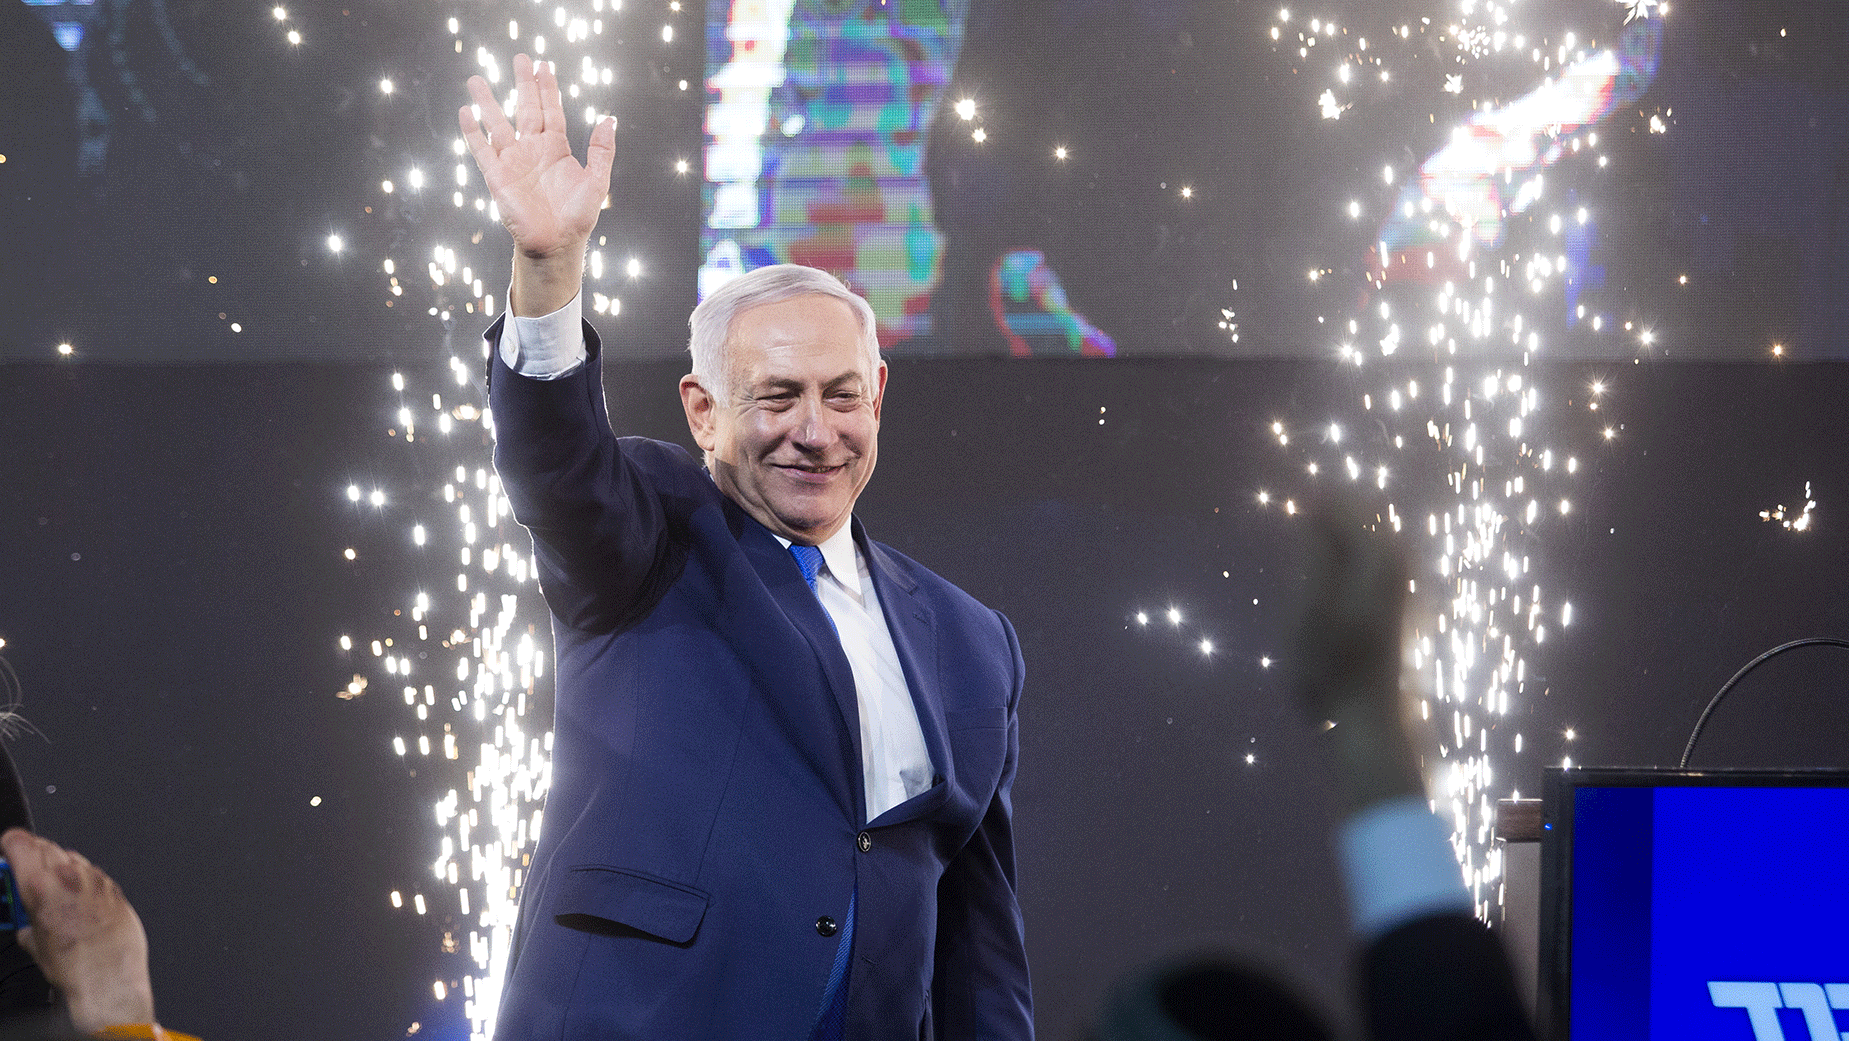 Israelis Prepare for “Election 2019 – The Sequel” as Iranian War Drums Loom Large